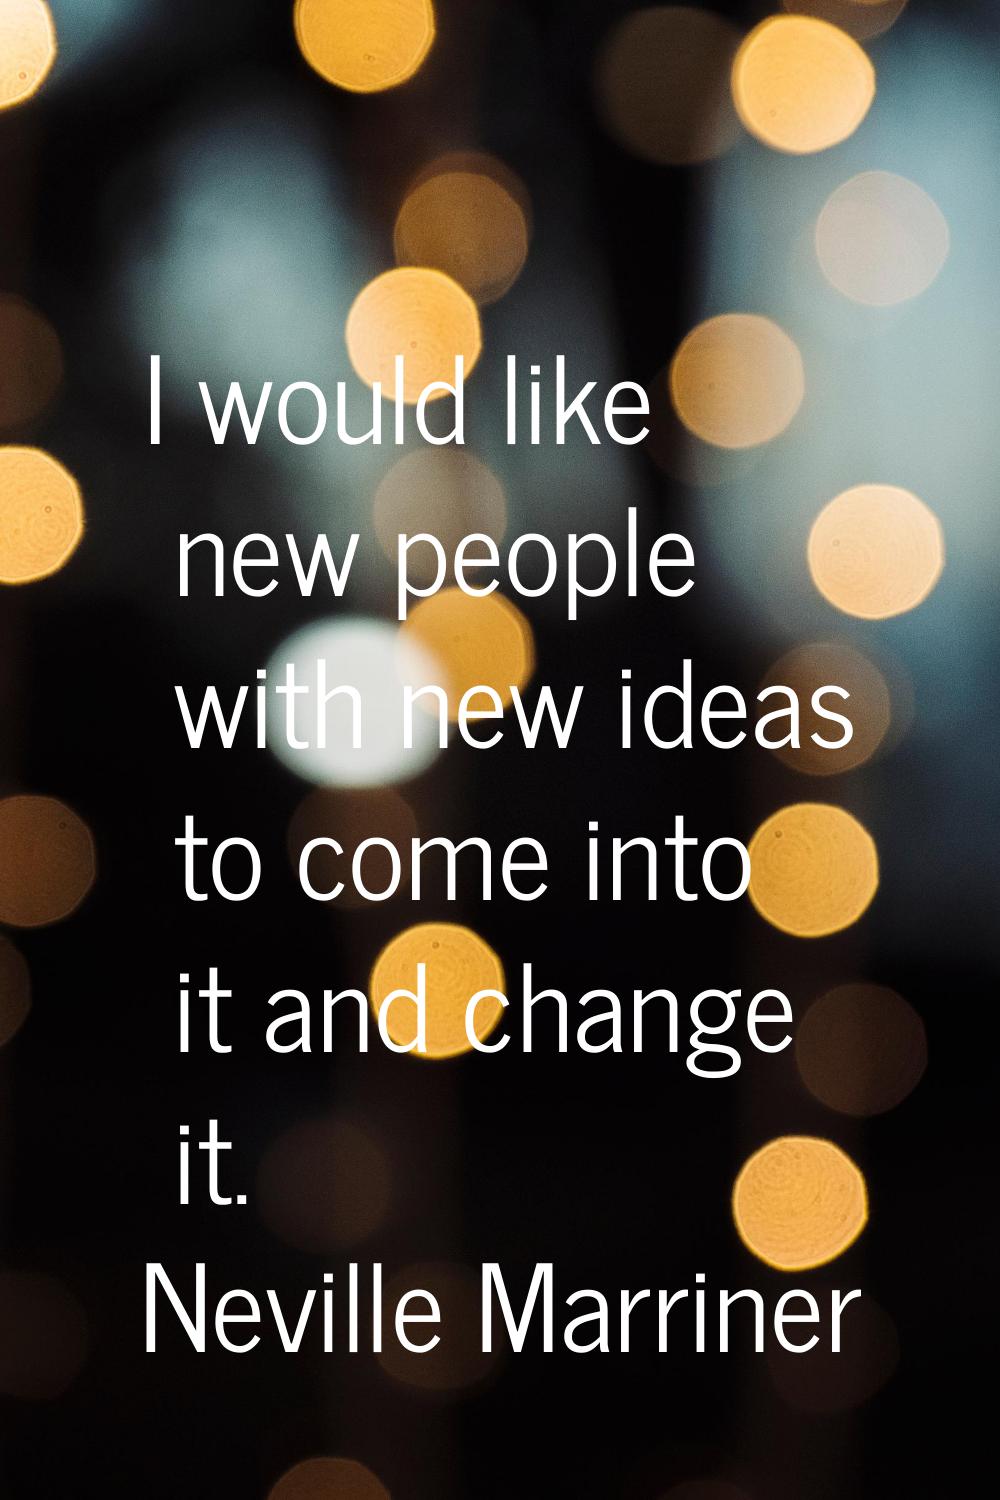 I would like new people with new ideas to come into it and change it.